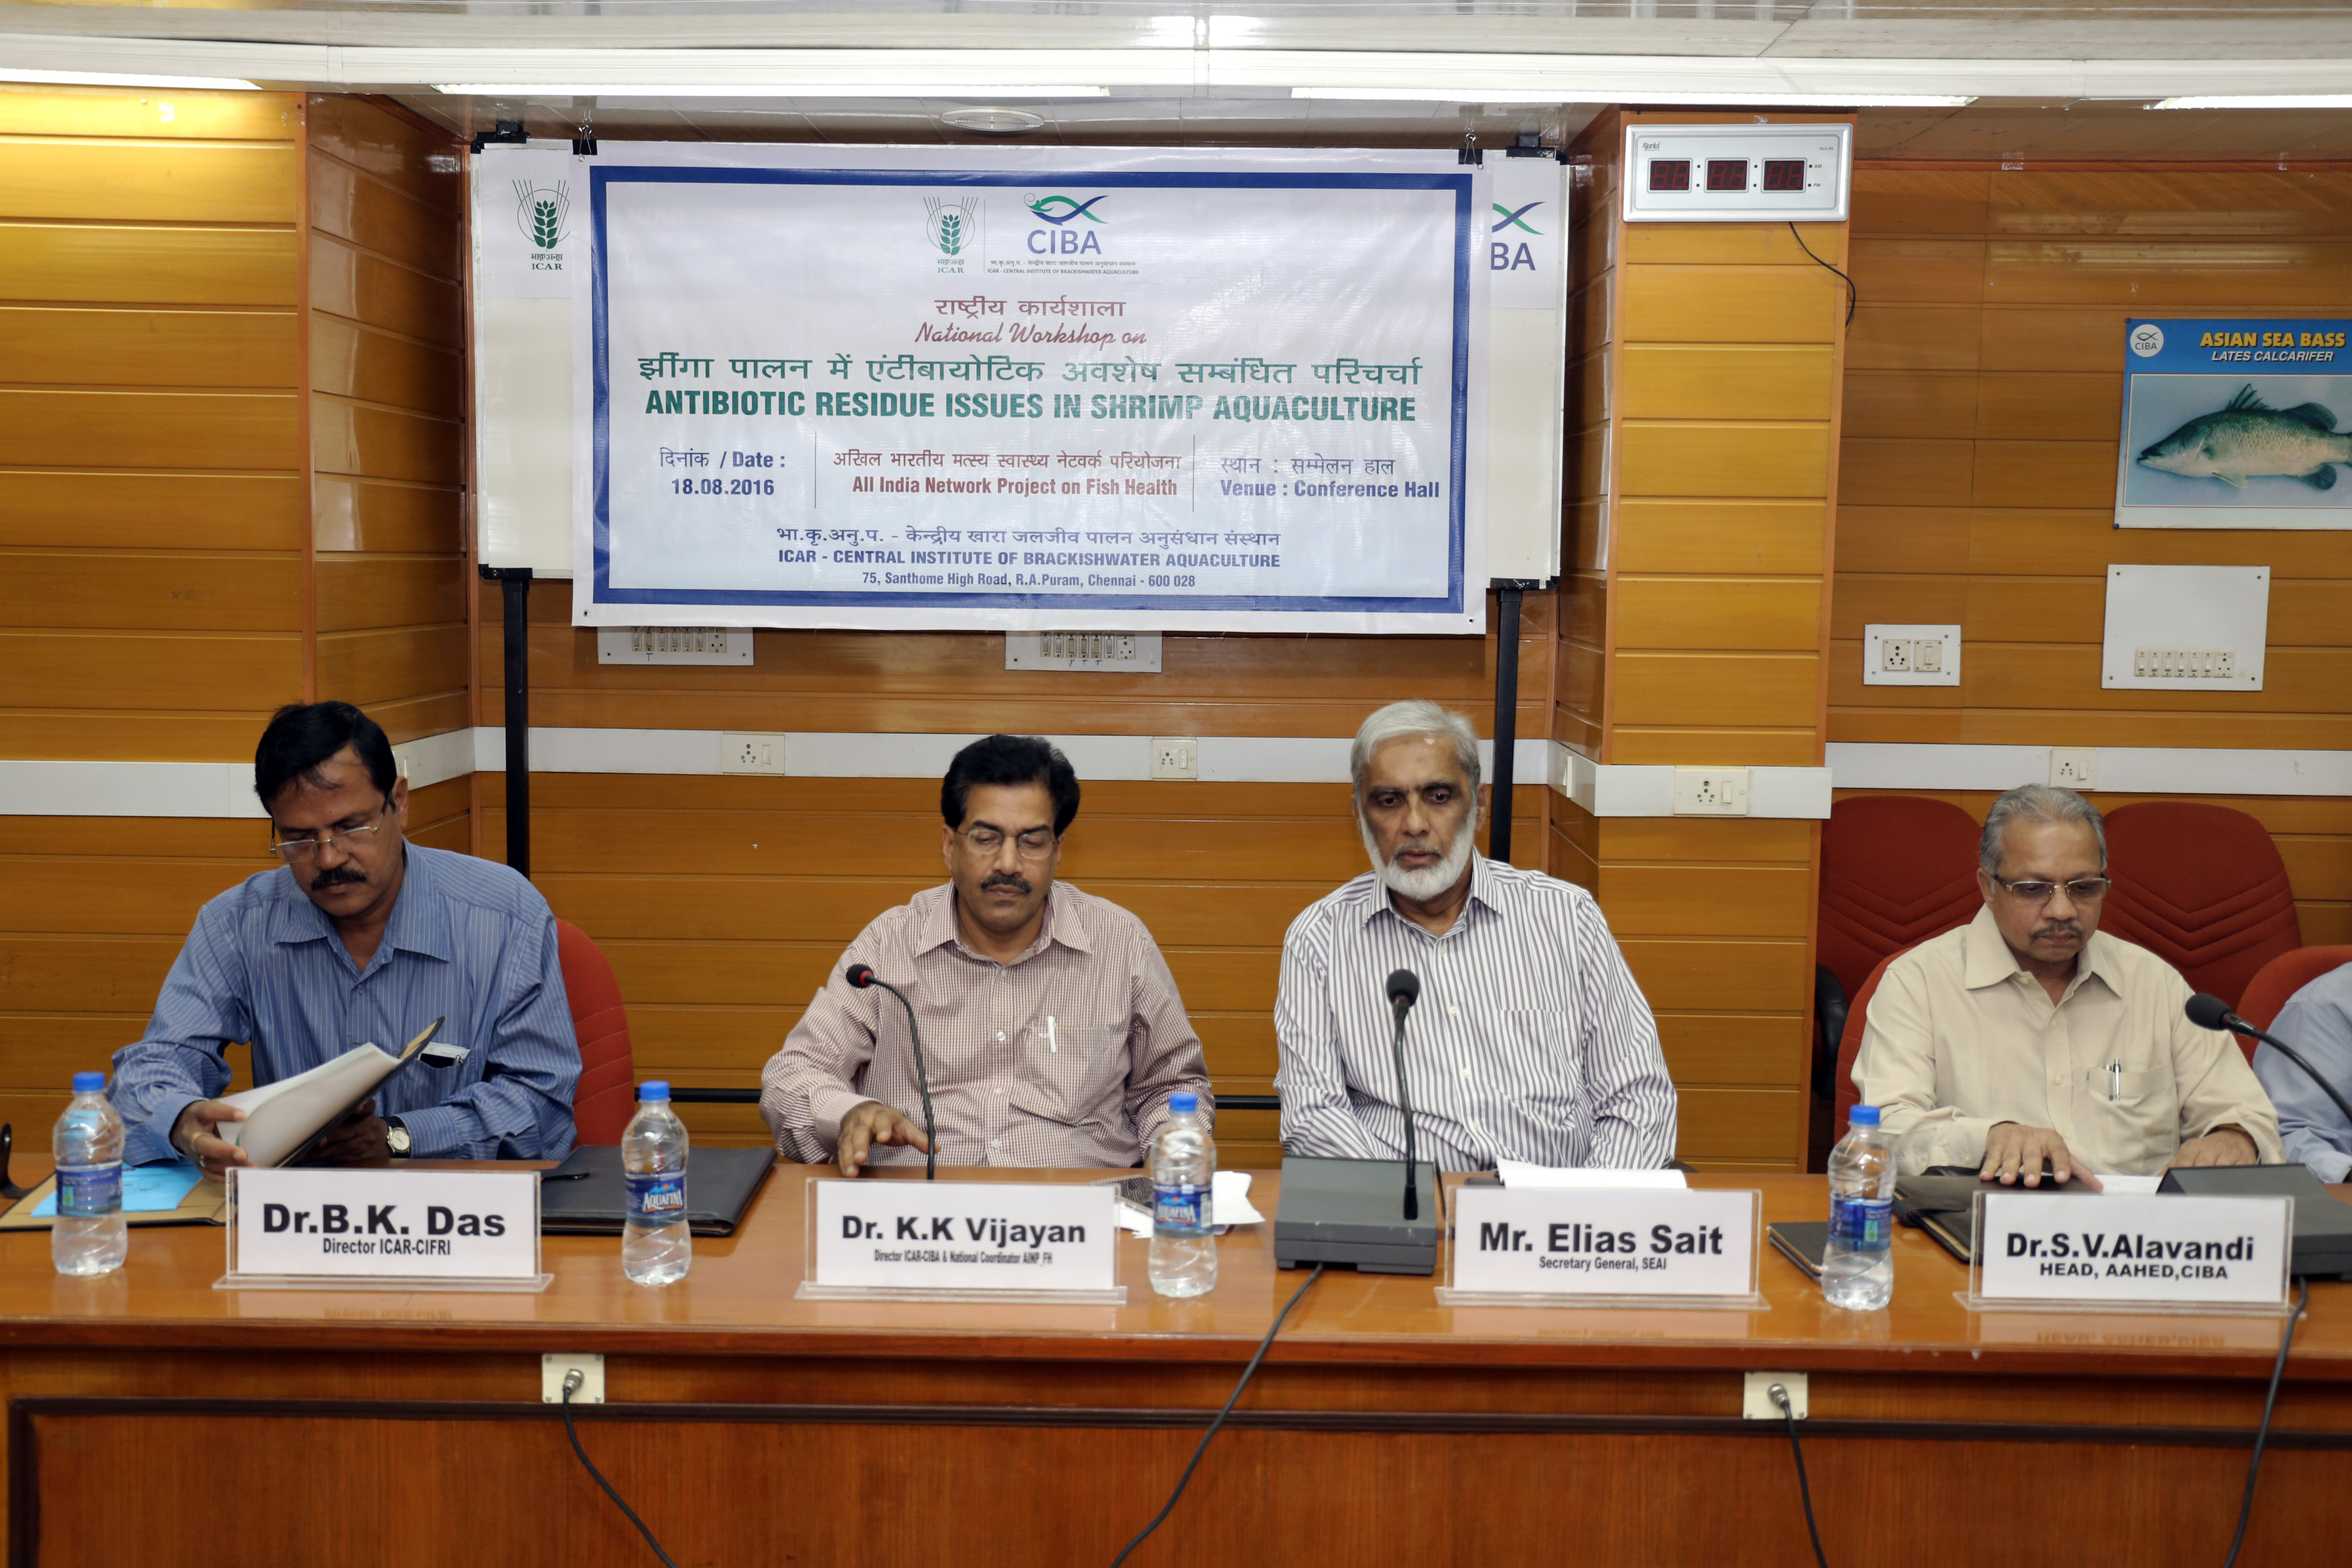 National workshop on Antibiotic residue issue in shrimp aquaculture - ICAR-CIBA to address antibiotic residues in farmed shrimp in India - 18th August 2016